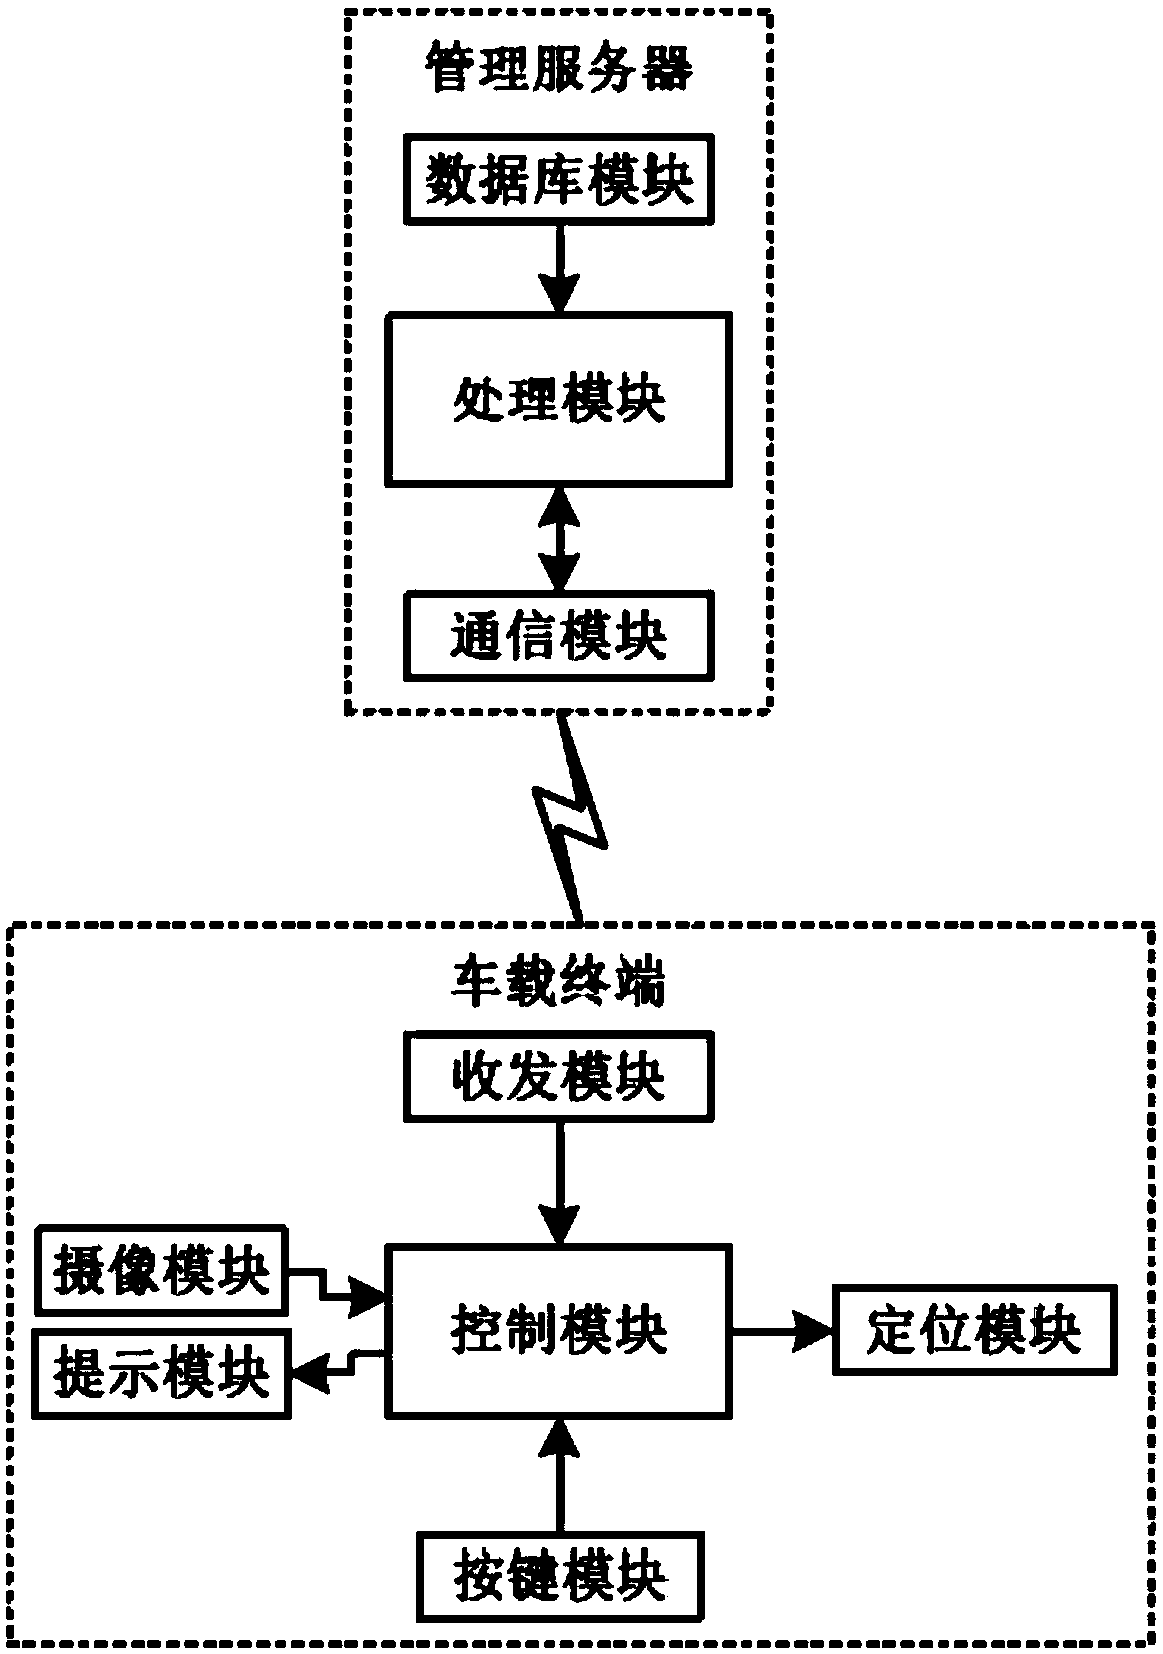 Vehicle accident management system and method